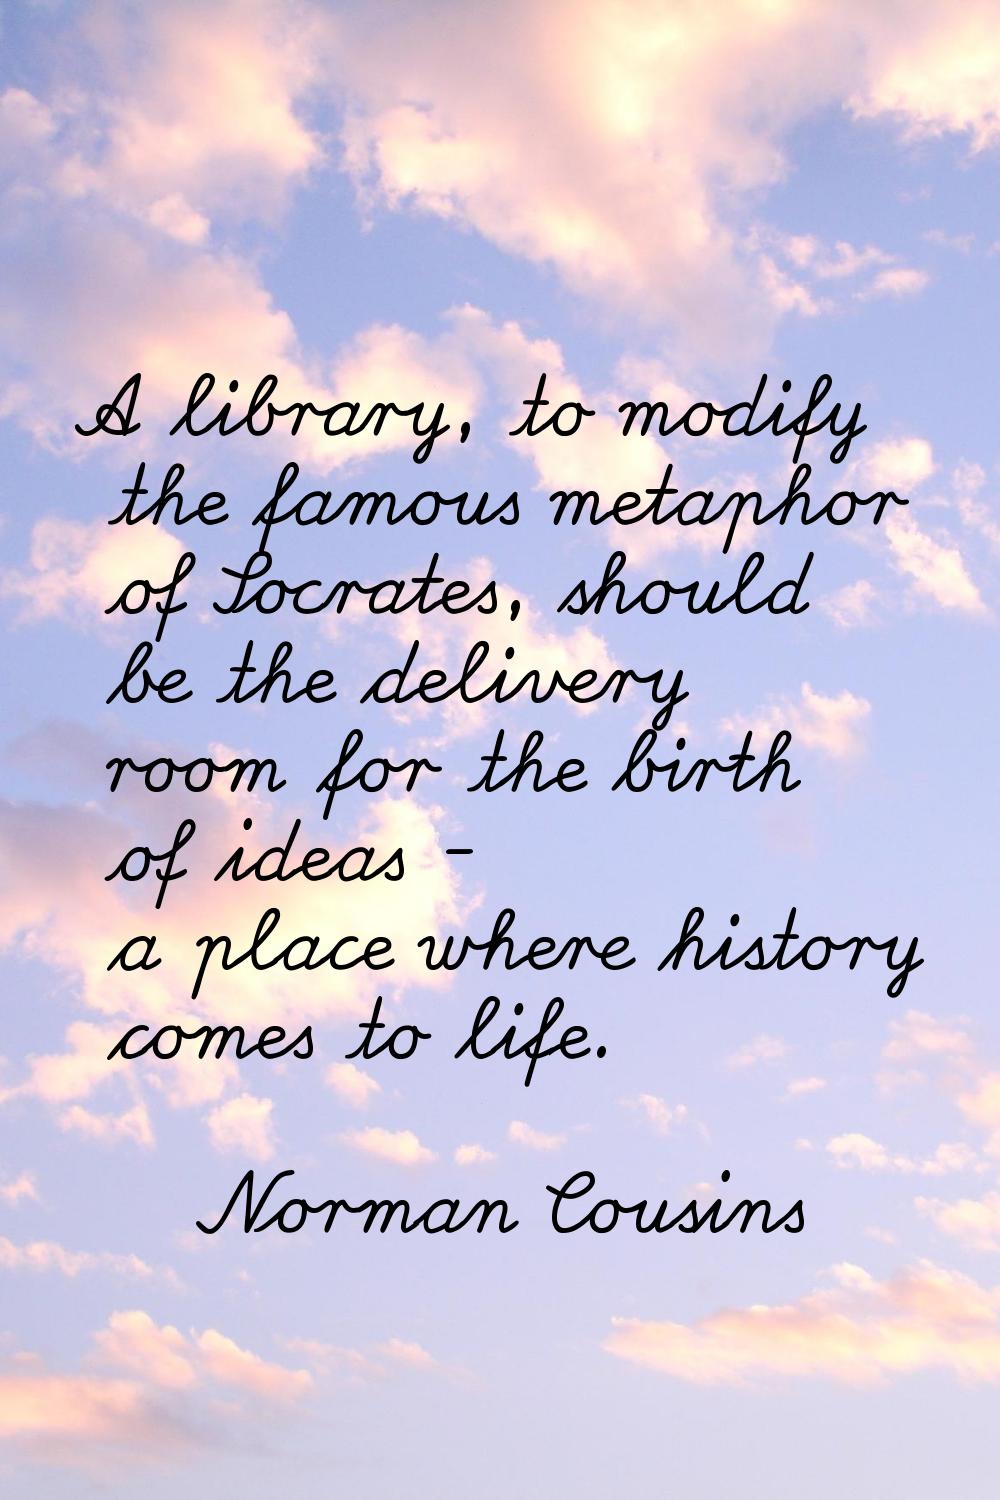 A library, to modify the famous metaphor of Socrates, should be the delivery room for the birth of 